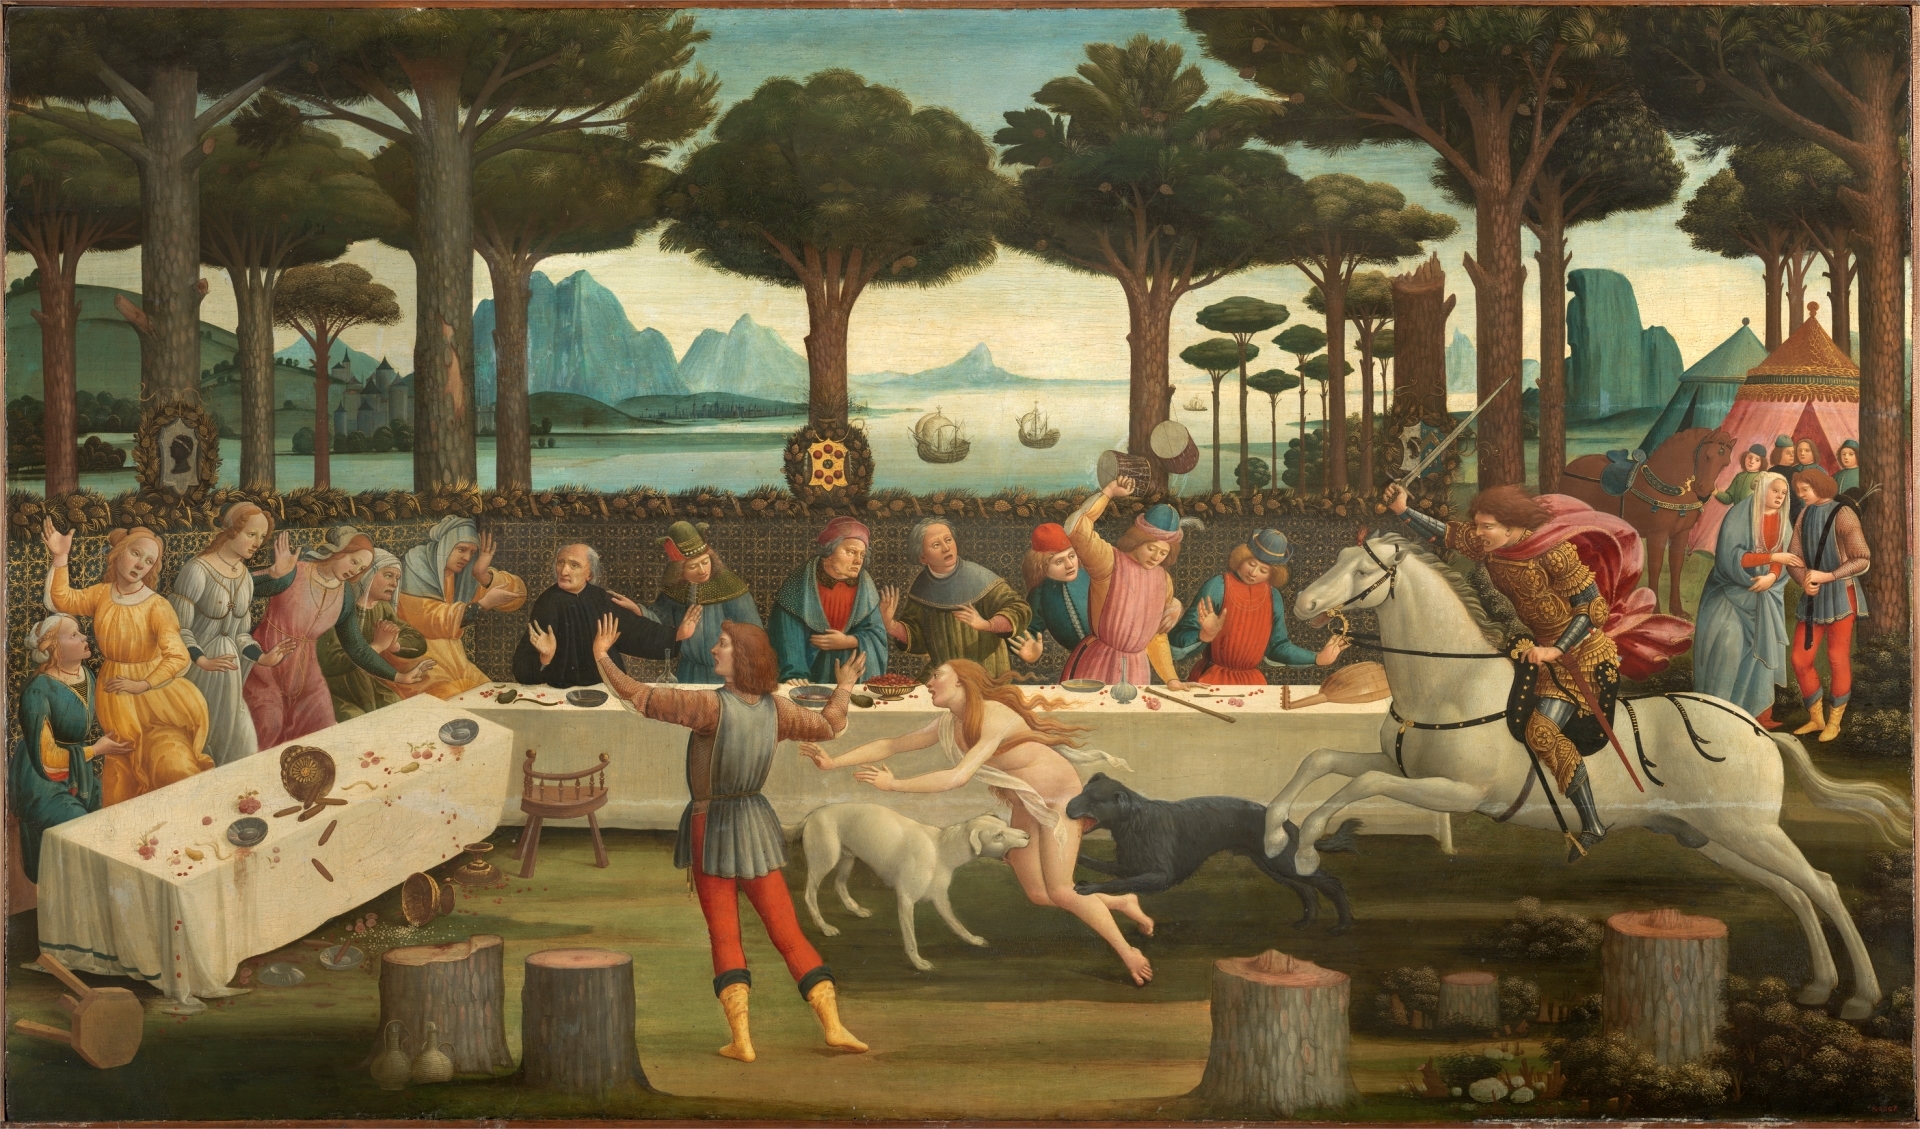 feasts painting: Sandro Botticelli, The Story of Nastagio degli Onesti: The Banquet in the Pine Forest